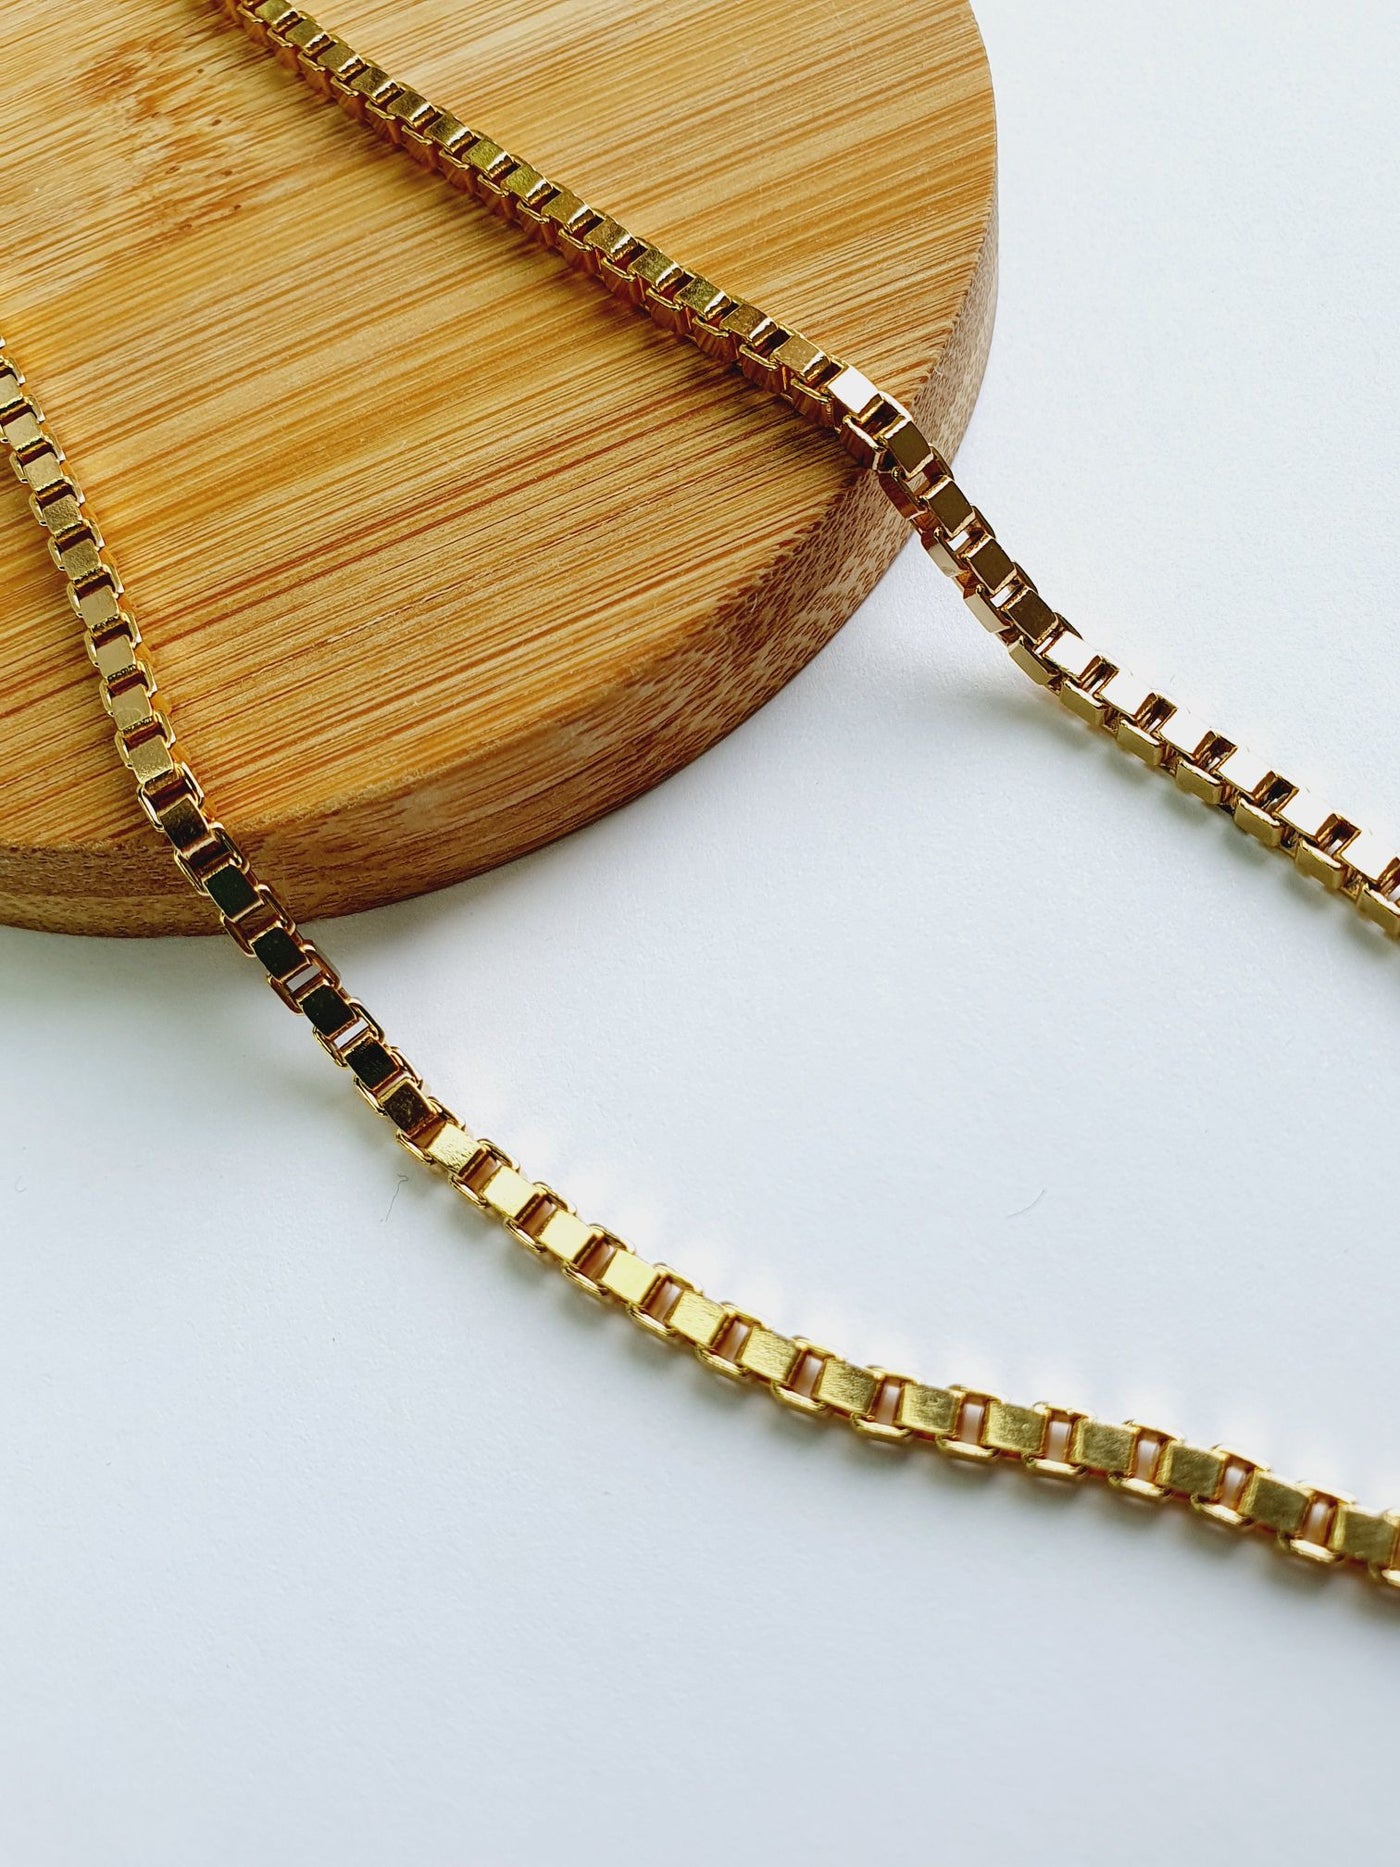 Vintage Gold Plated Box Chain Necklace